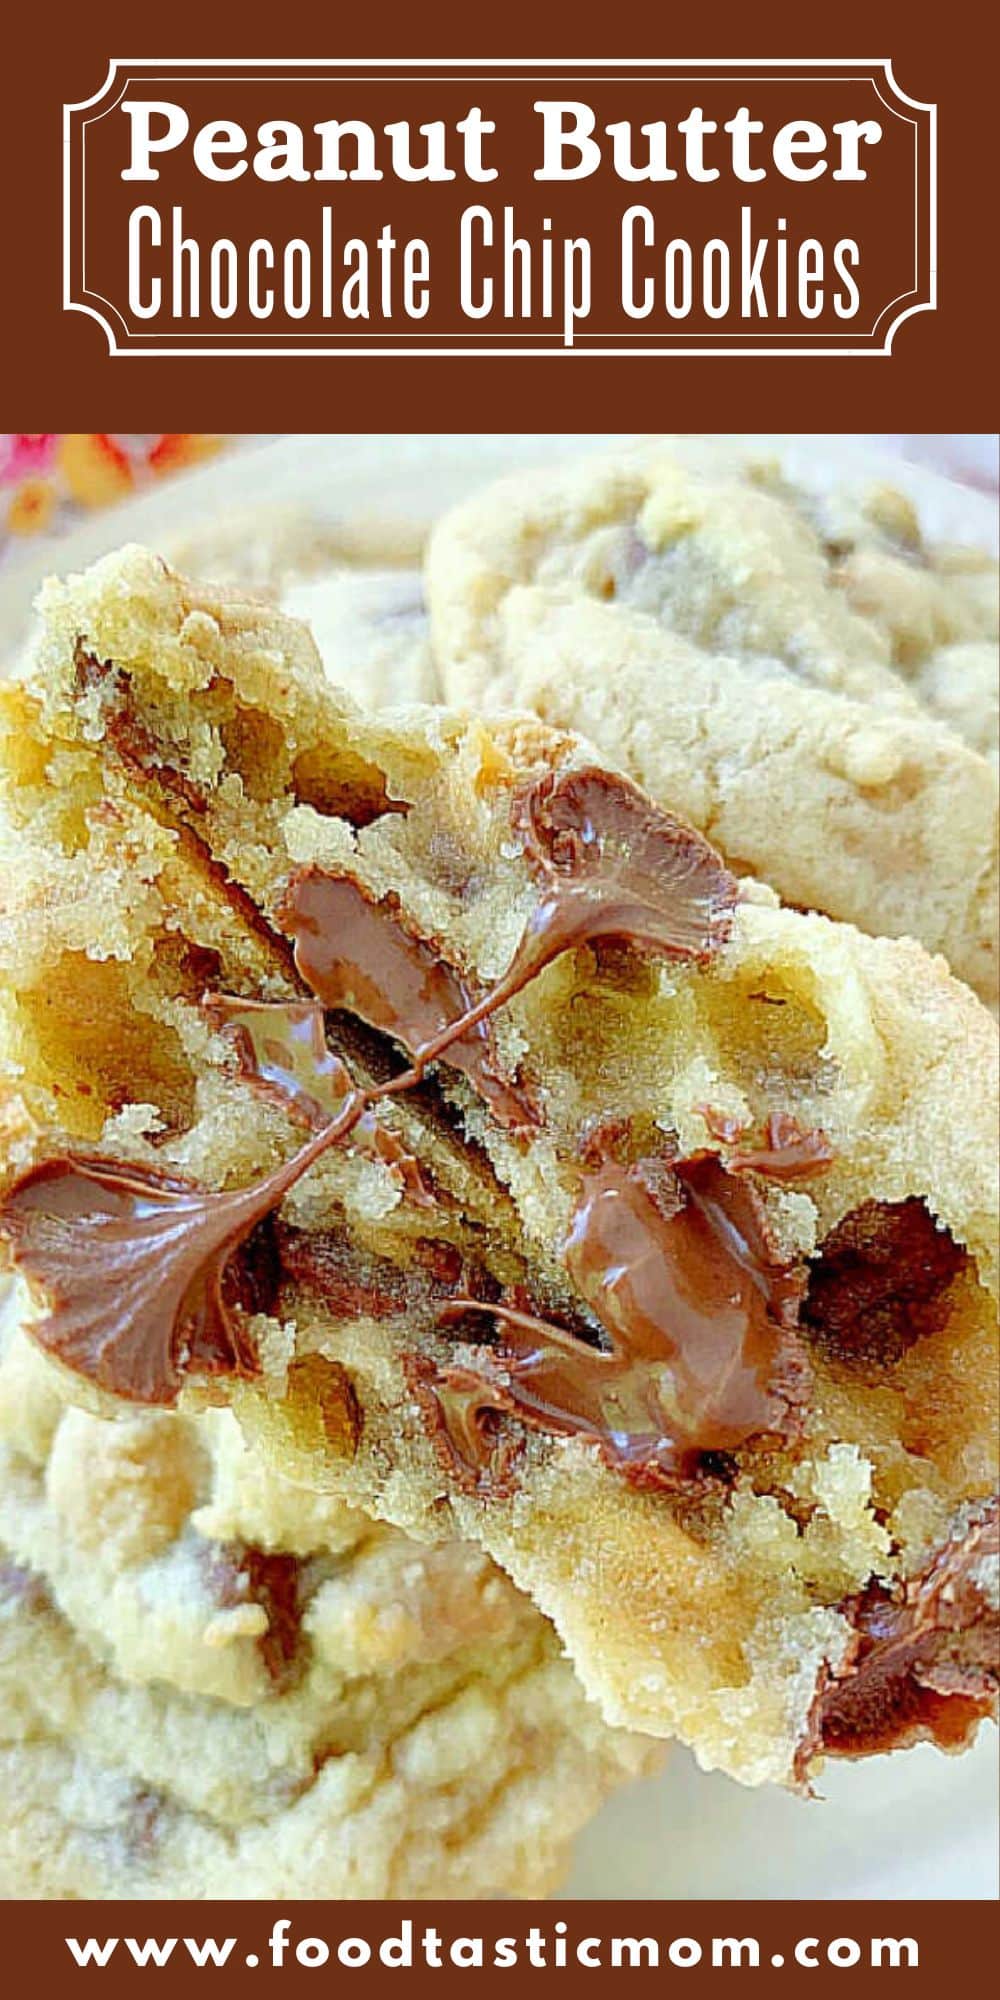 These Chocolate and Peanut Butter Chip Cookies are so good they have been called mind-blowing. Find out all my secrets for the best cookies. via @foodtasticmom